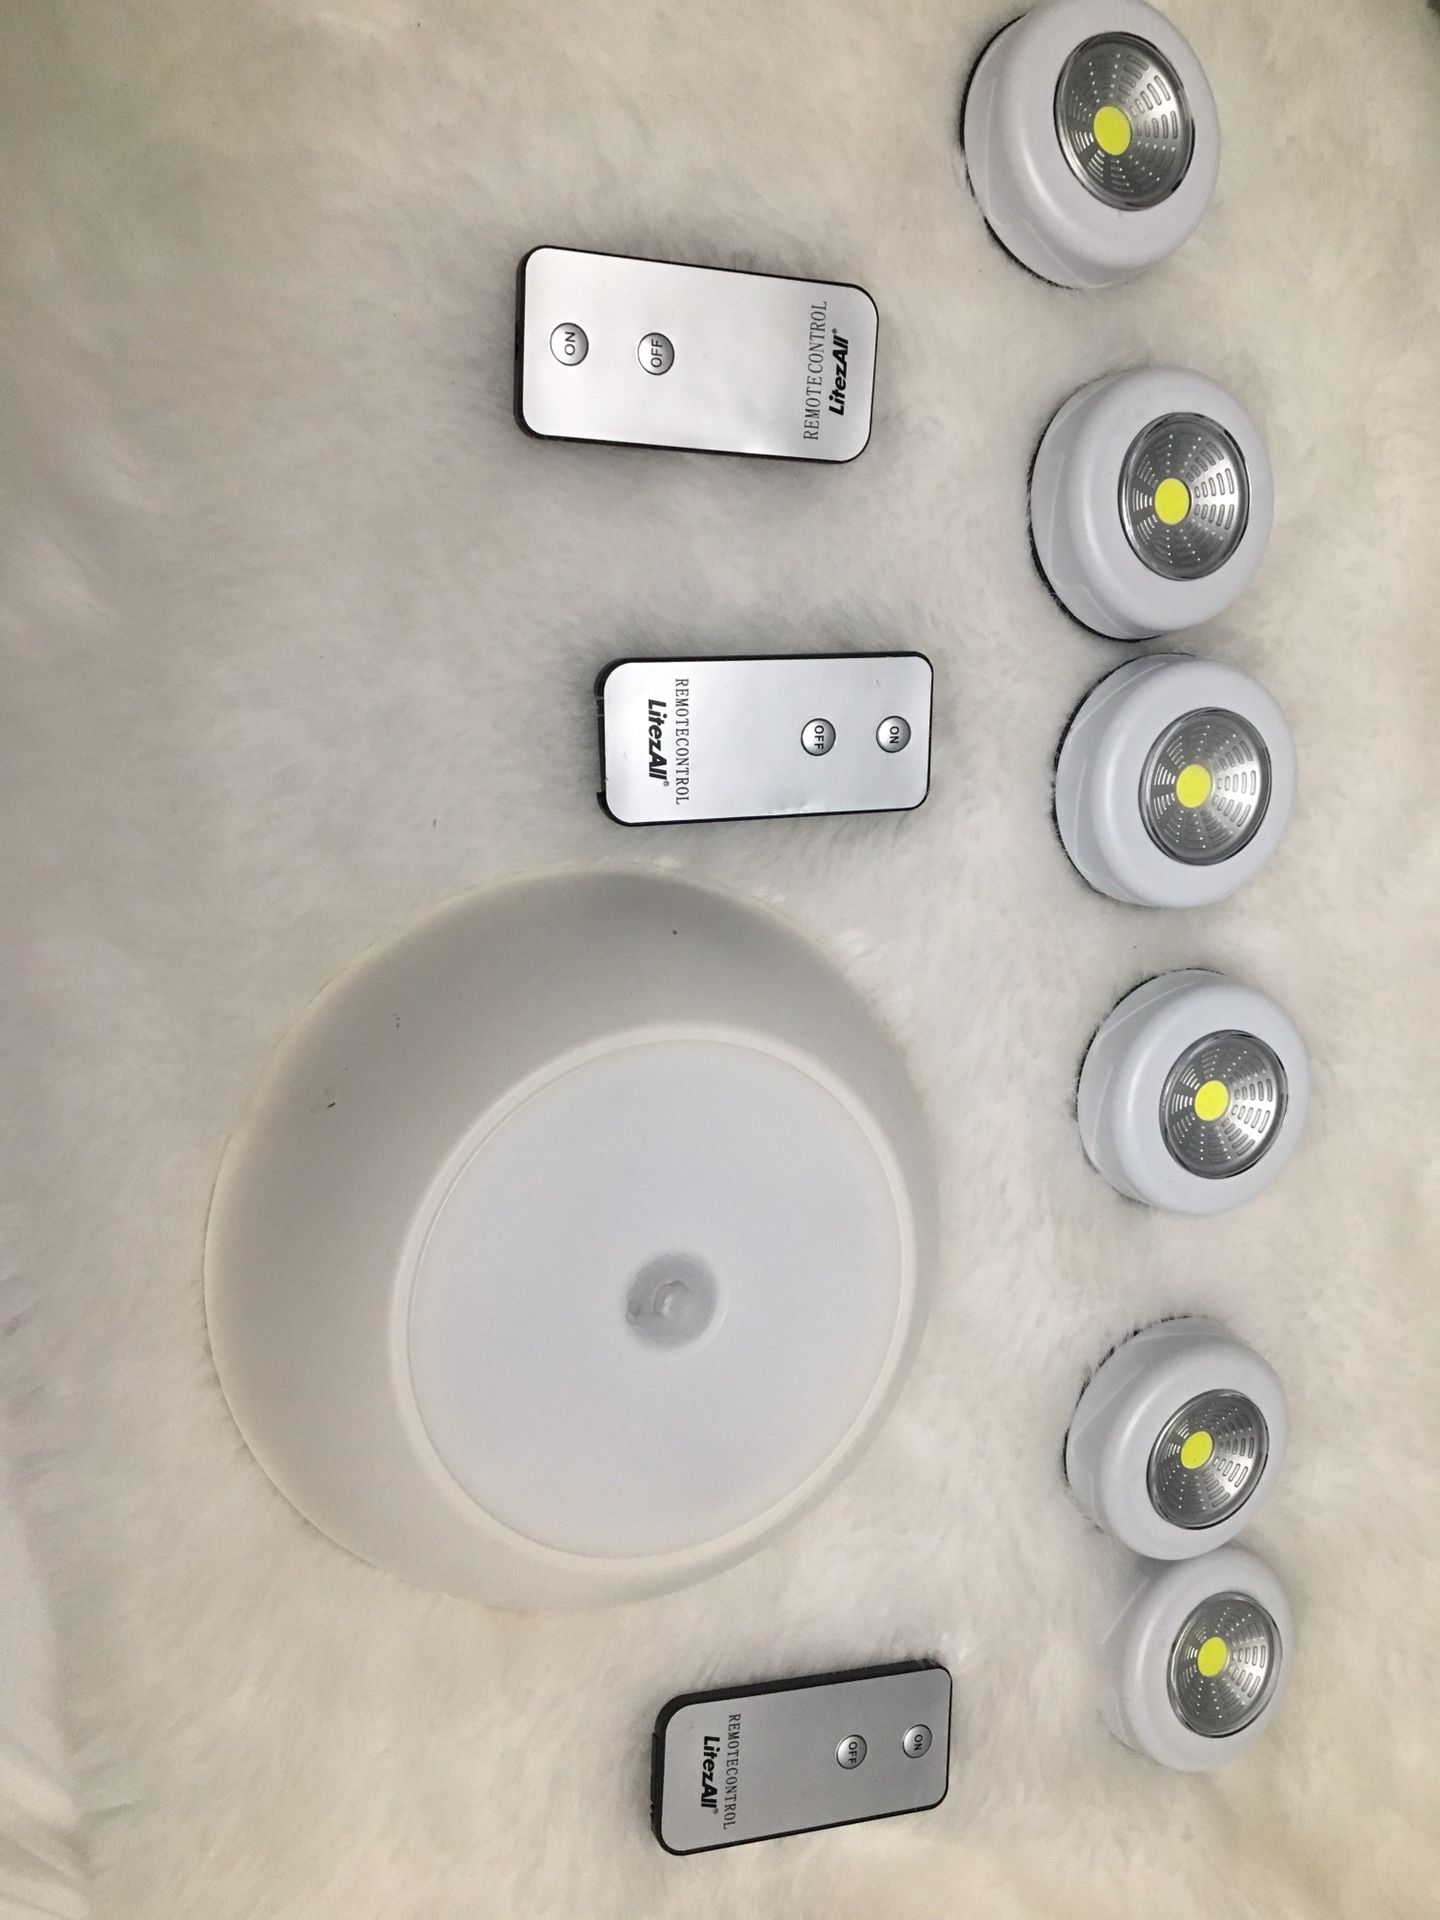 7 lights works with batteries also needs new batteries the large one is out door or in door Motion light can be use for garage patio or anywhere you